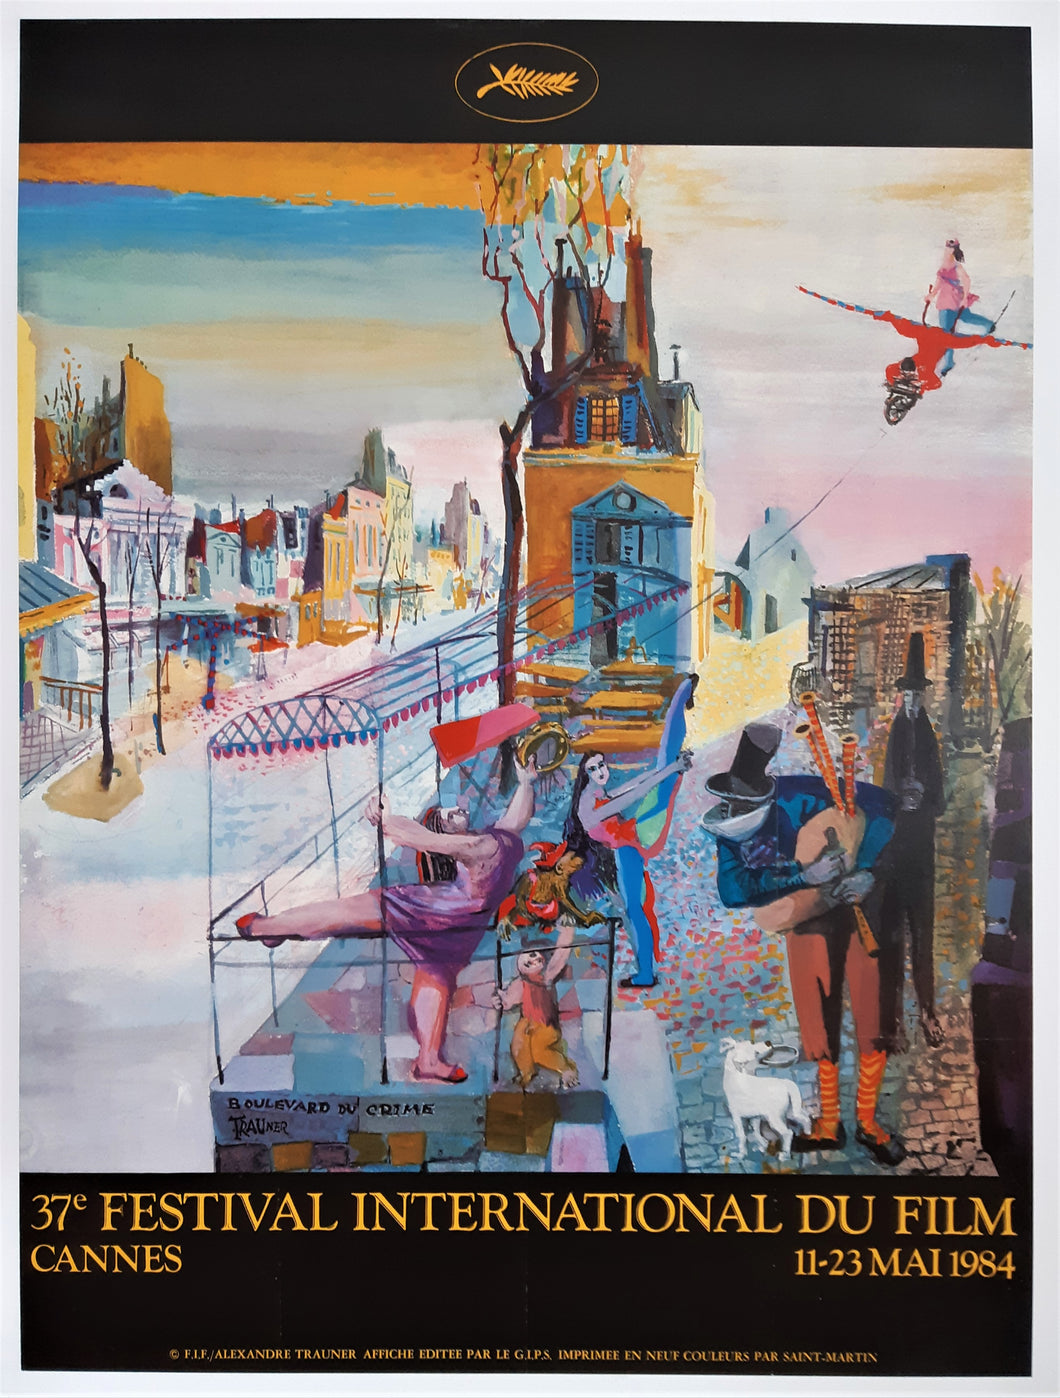 Very Large and Colorful 1984 Poster Lithograph for the 37th International Film Festival in Cannes, France